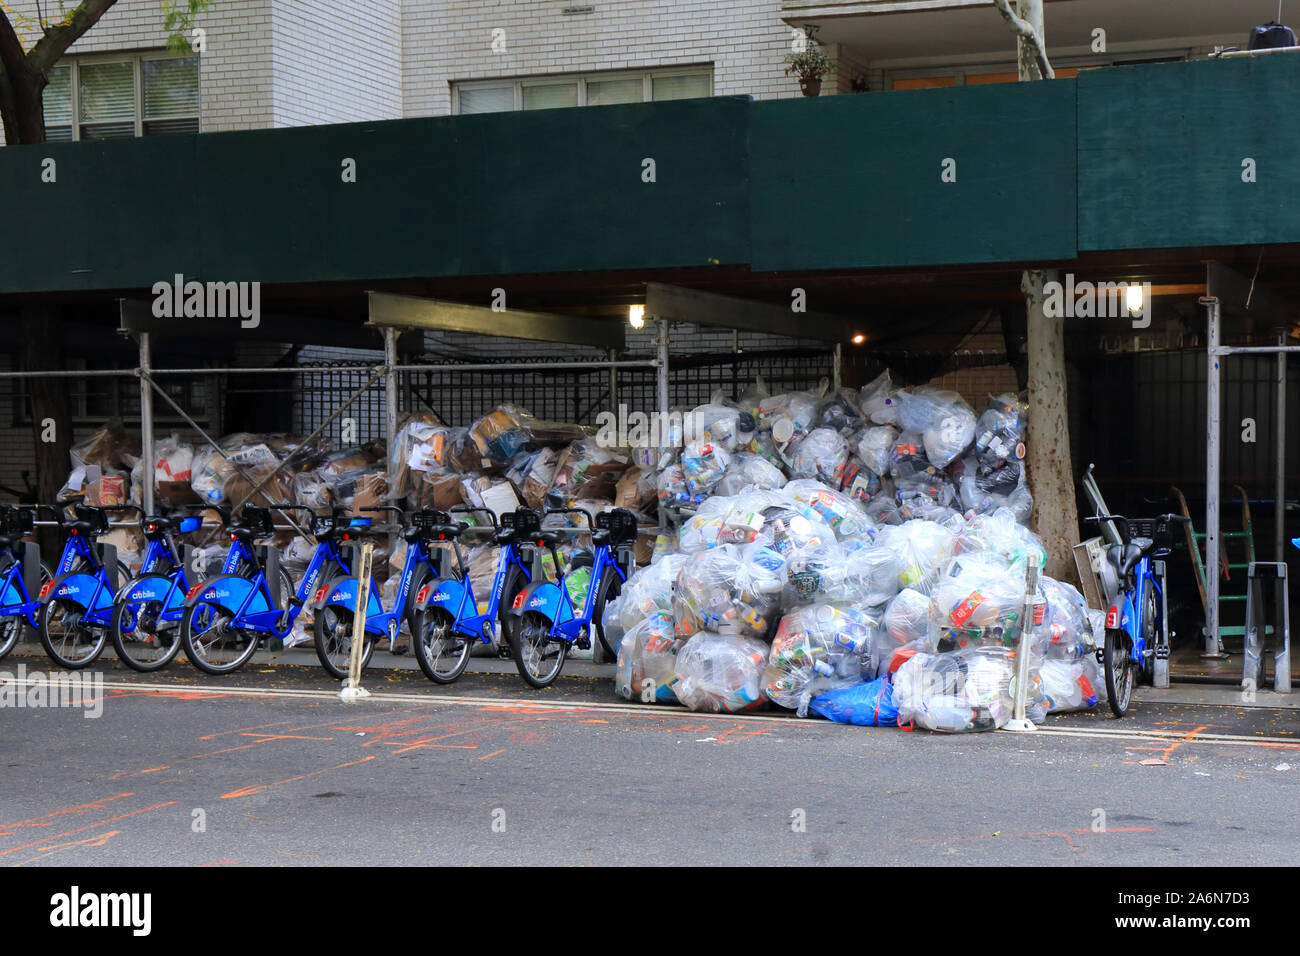 An organized trifecta of garbage, sidewalk scaffolding, and citibikes in New York City Stock Photo